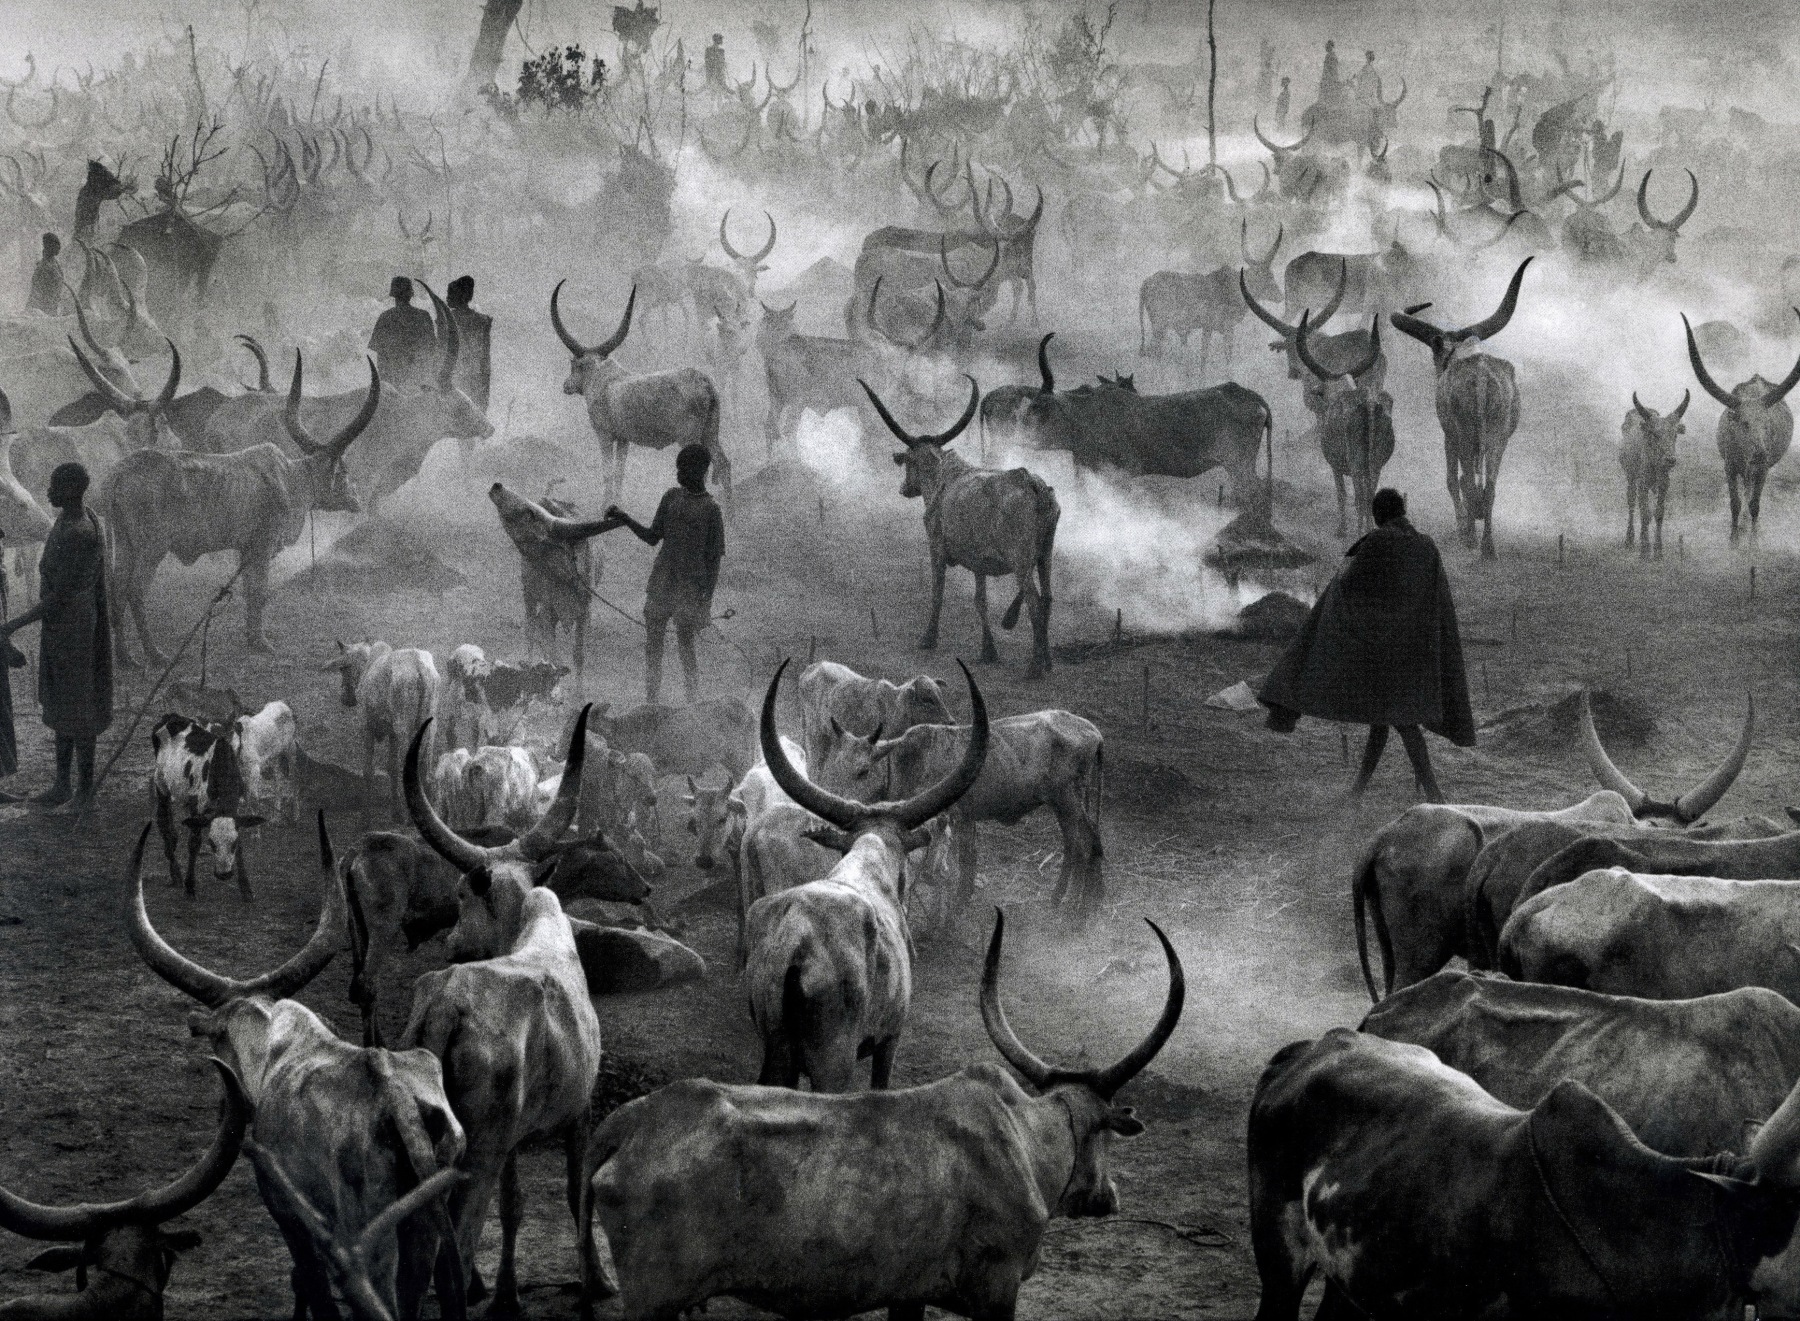 Dinka cattle camp of Amak, Southern Sudan, from the series Genesis, 2006. 16 x 20, 20 x 24, 24 x 35, 36 x 50 or 50 x 68 inch gelatin silver print